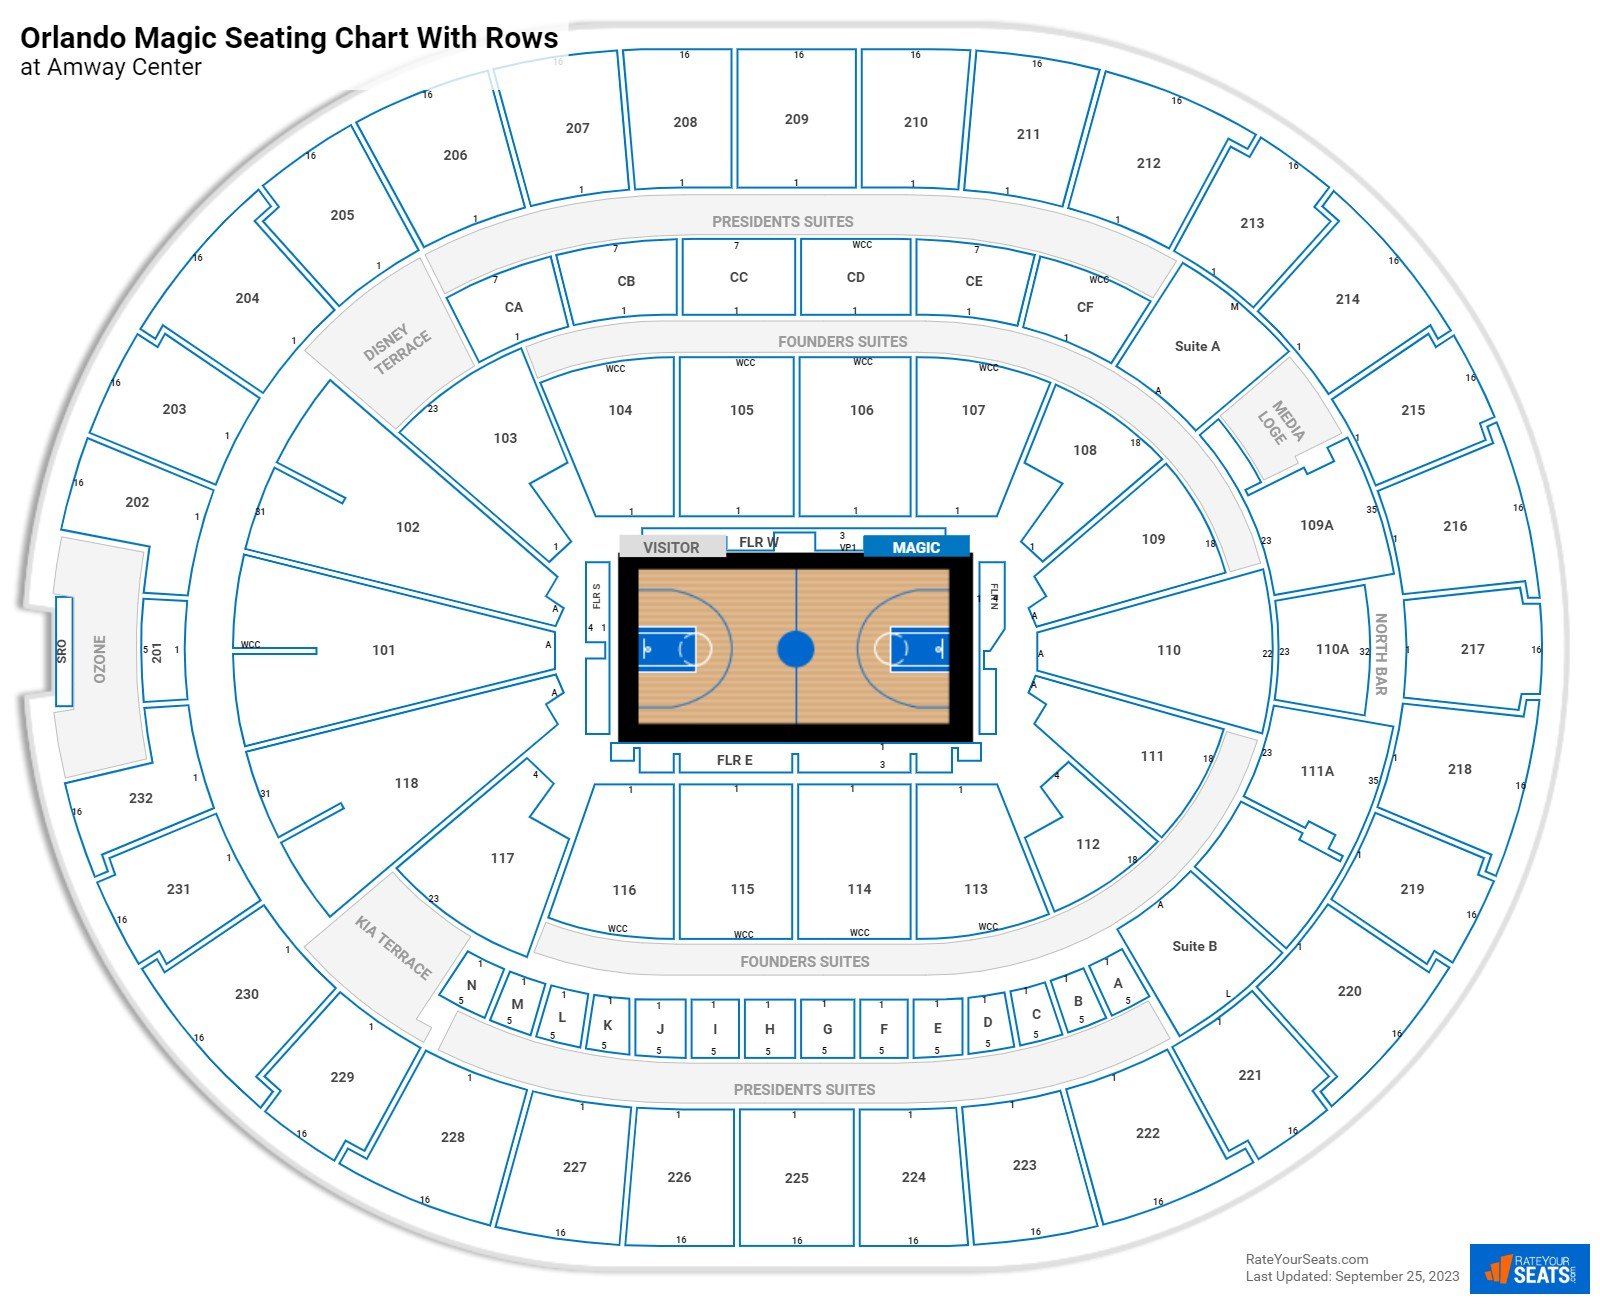 Amway Center seating chart with row numbers